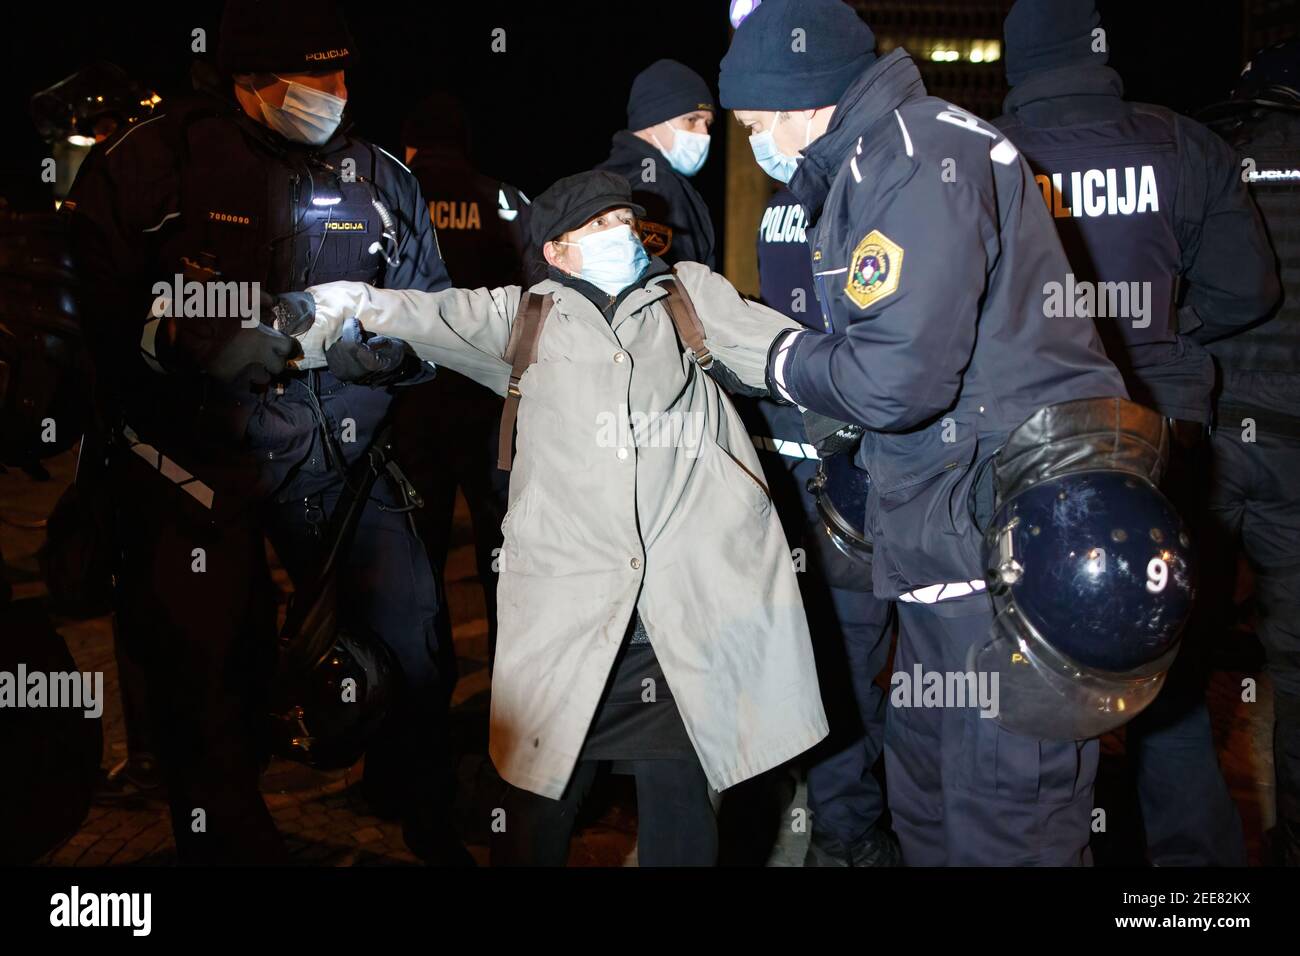 Policemen arrest a woman during an anti-government protest in Ljubljana. The protests against Slovenian Prime Minister Janez Jansa continued on the day that the National Assembly debated a motion of no confidence in the government. The no-confidence vote was initiated by the opposition that accuses the government of authoritarianism. (Photo by Luka Dakskobler / SOPA Images/Sipa USA) Stock Photo